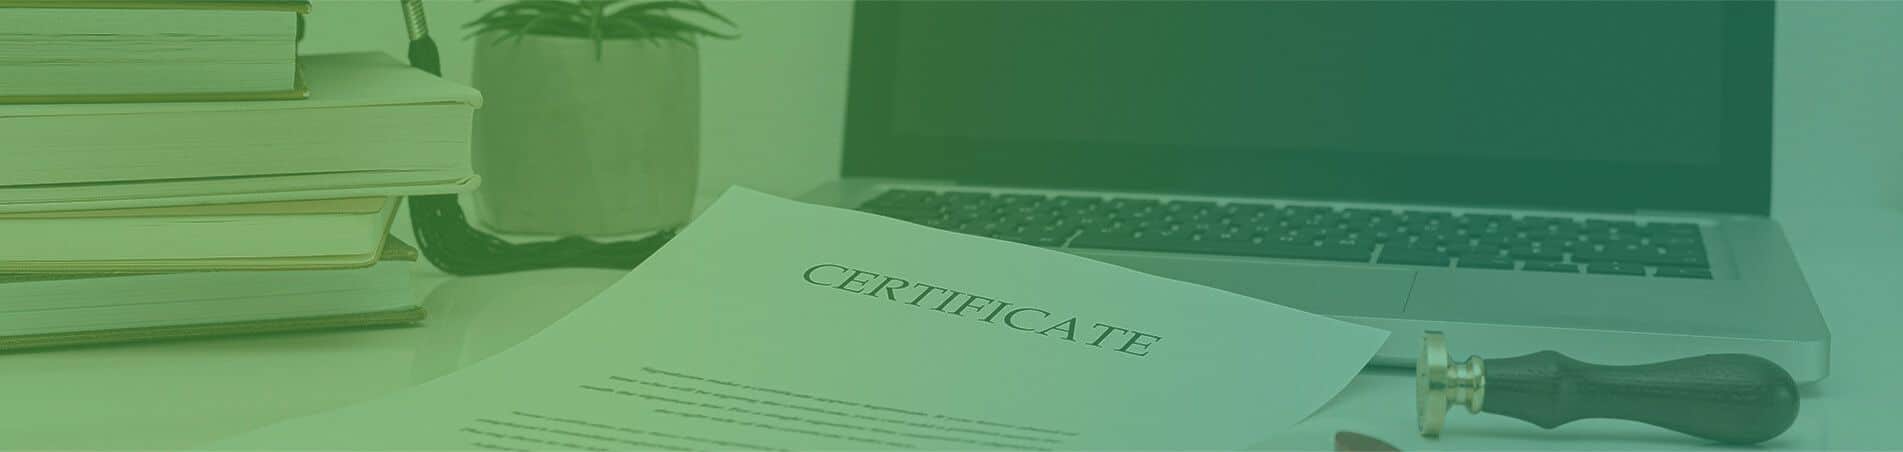 HIPAA Compliance Training and Certification Guide